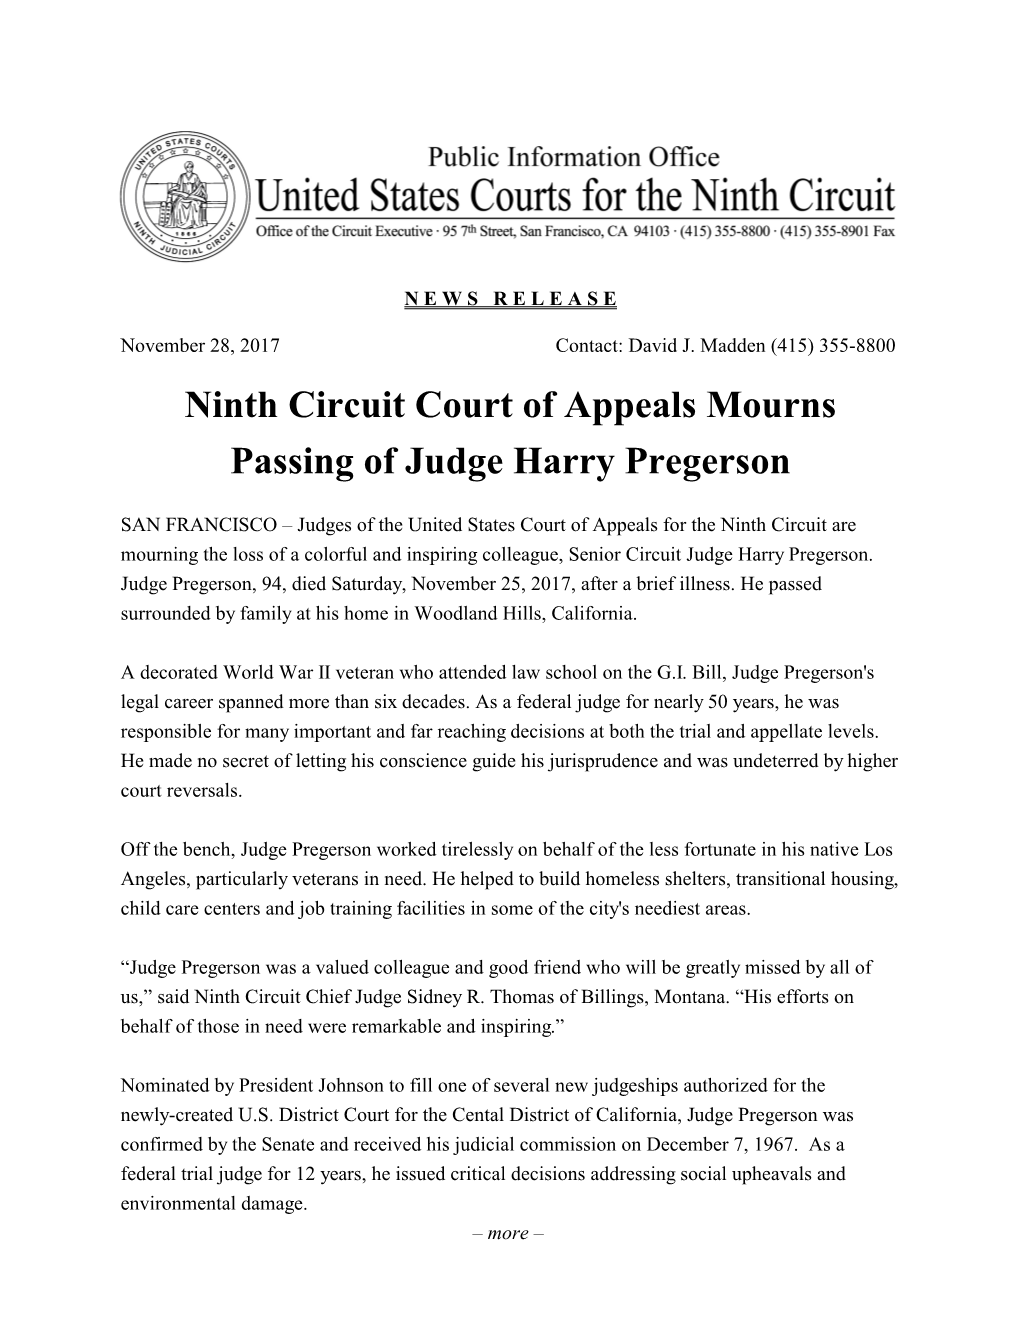 Ninth Circuit Court of Appeals Mourns Passing of Judge Harry Pregerson